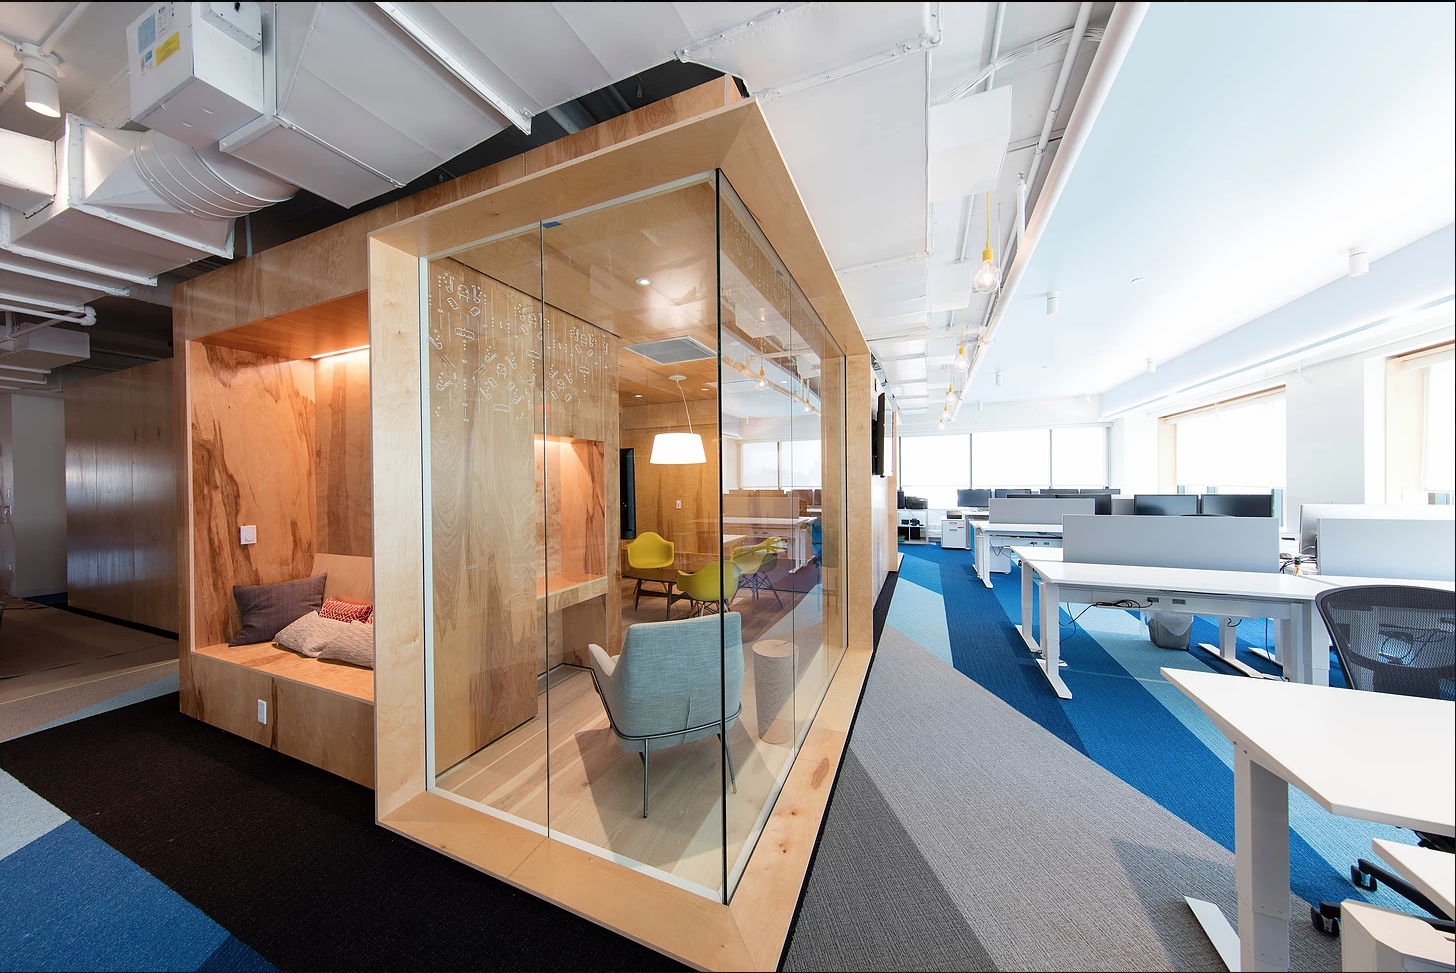 Office lounge or meeting area fully enclosed in glass in open concept office design